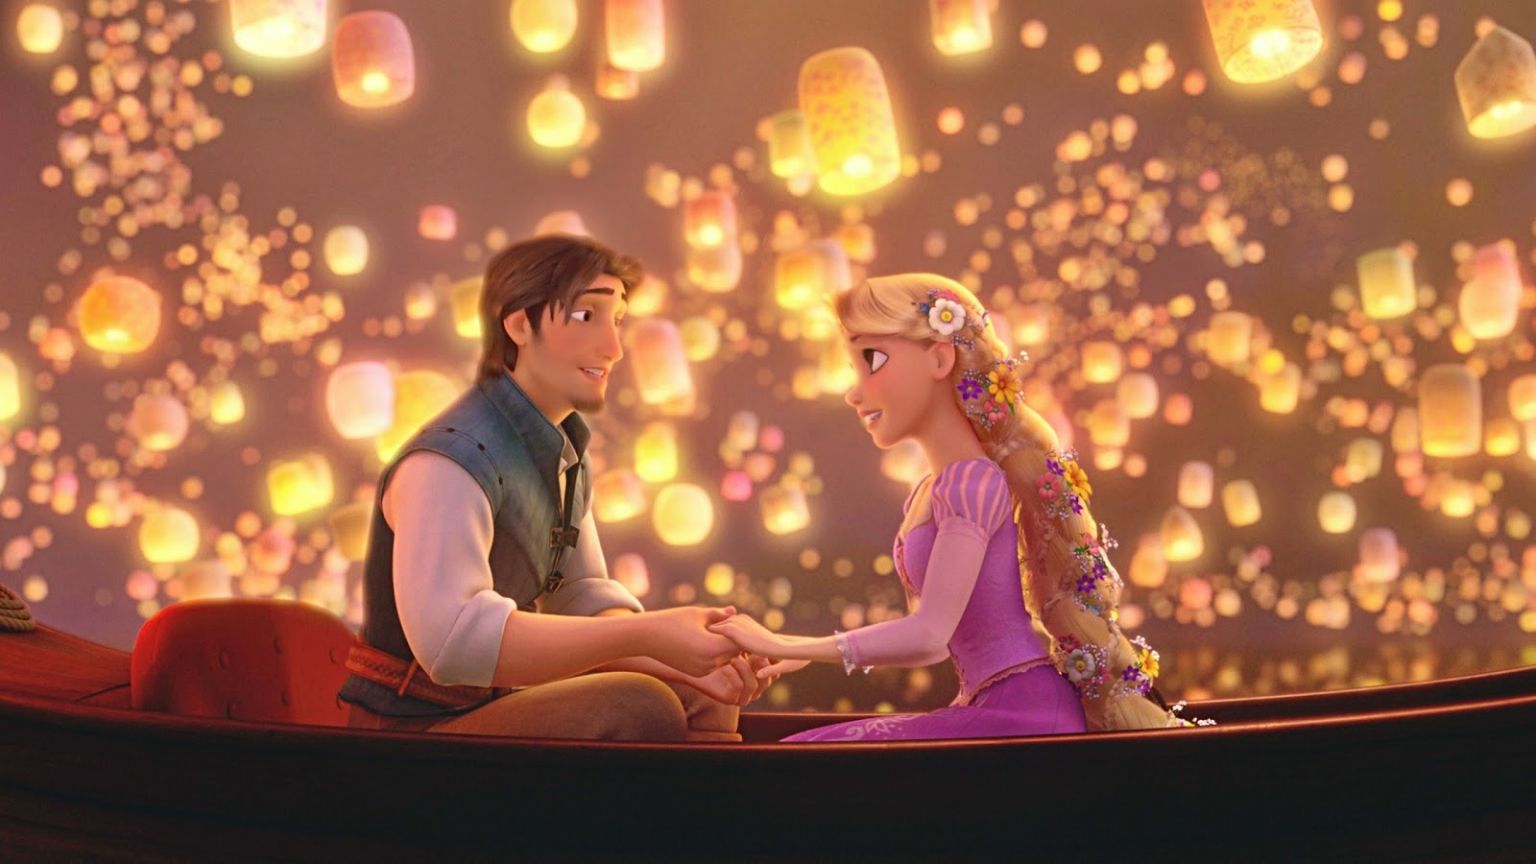 Tangled Wallpapers.